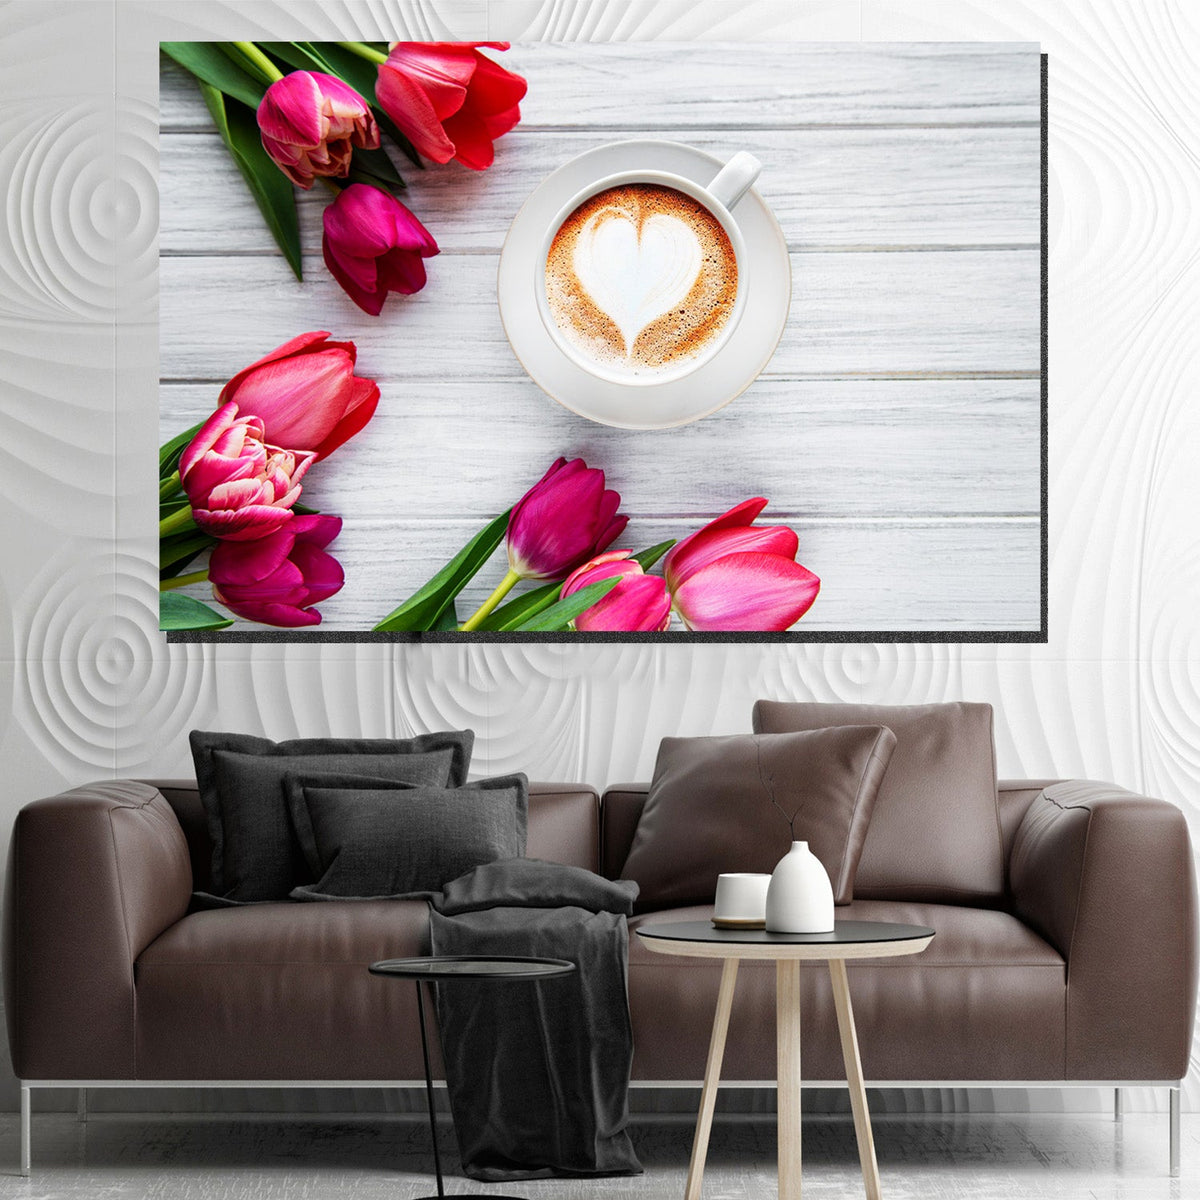 https://cdn.shopify.com/s/files/1/0387/9986/8044/products/CoffeeandTulipsCanvasArtprintStretched-4.jpg